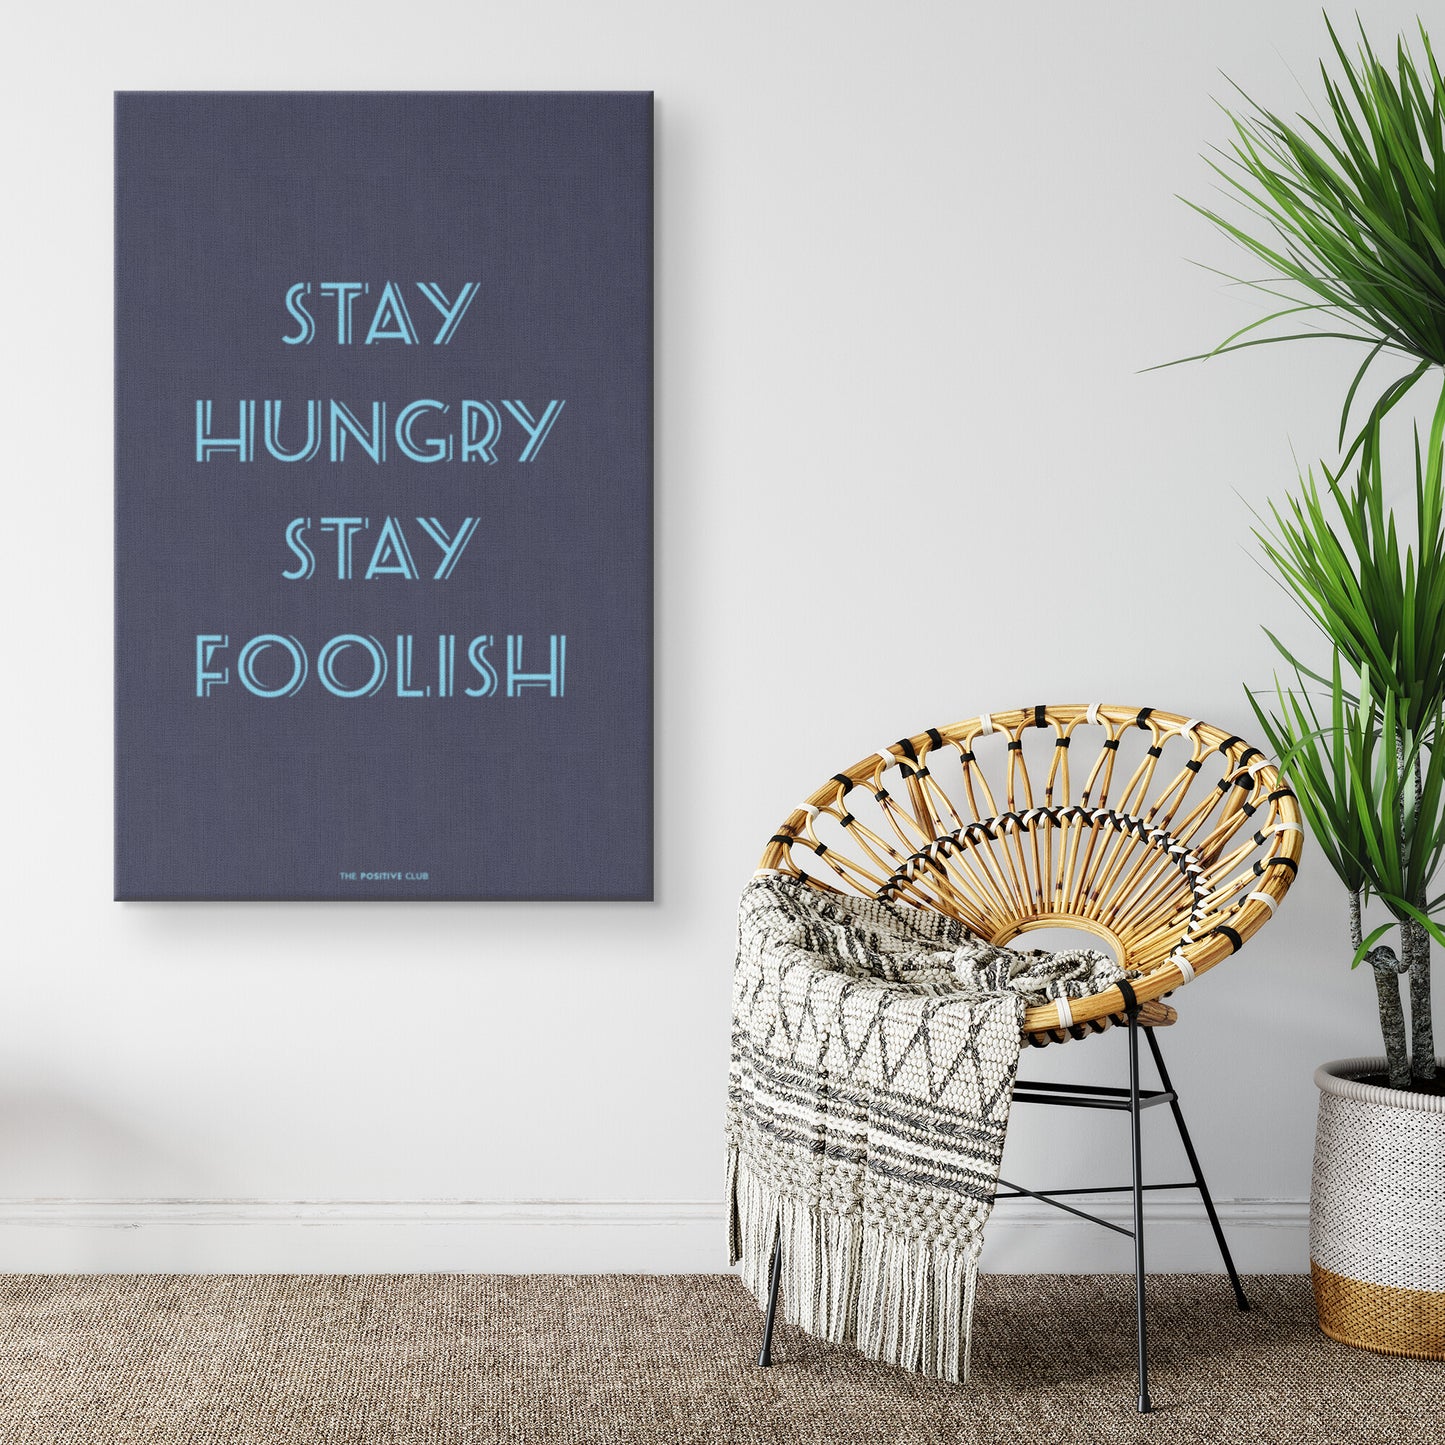 STAY HUNGRY STAY FOOLISH